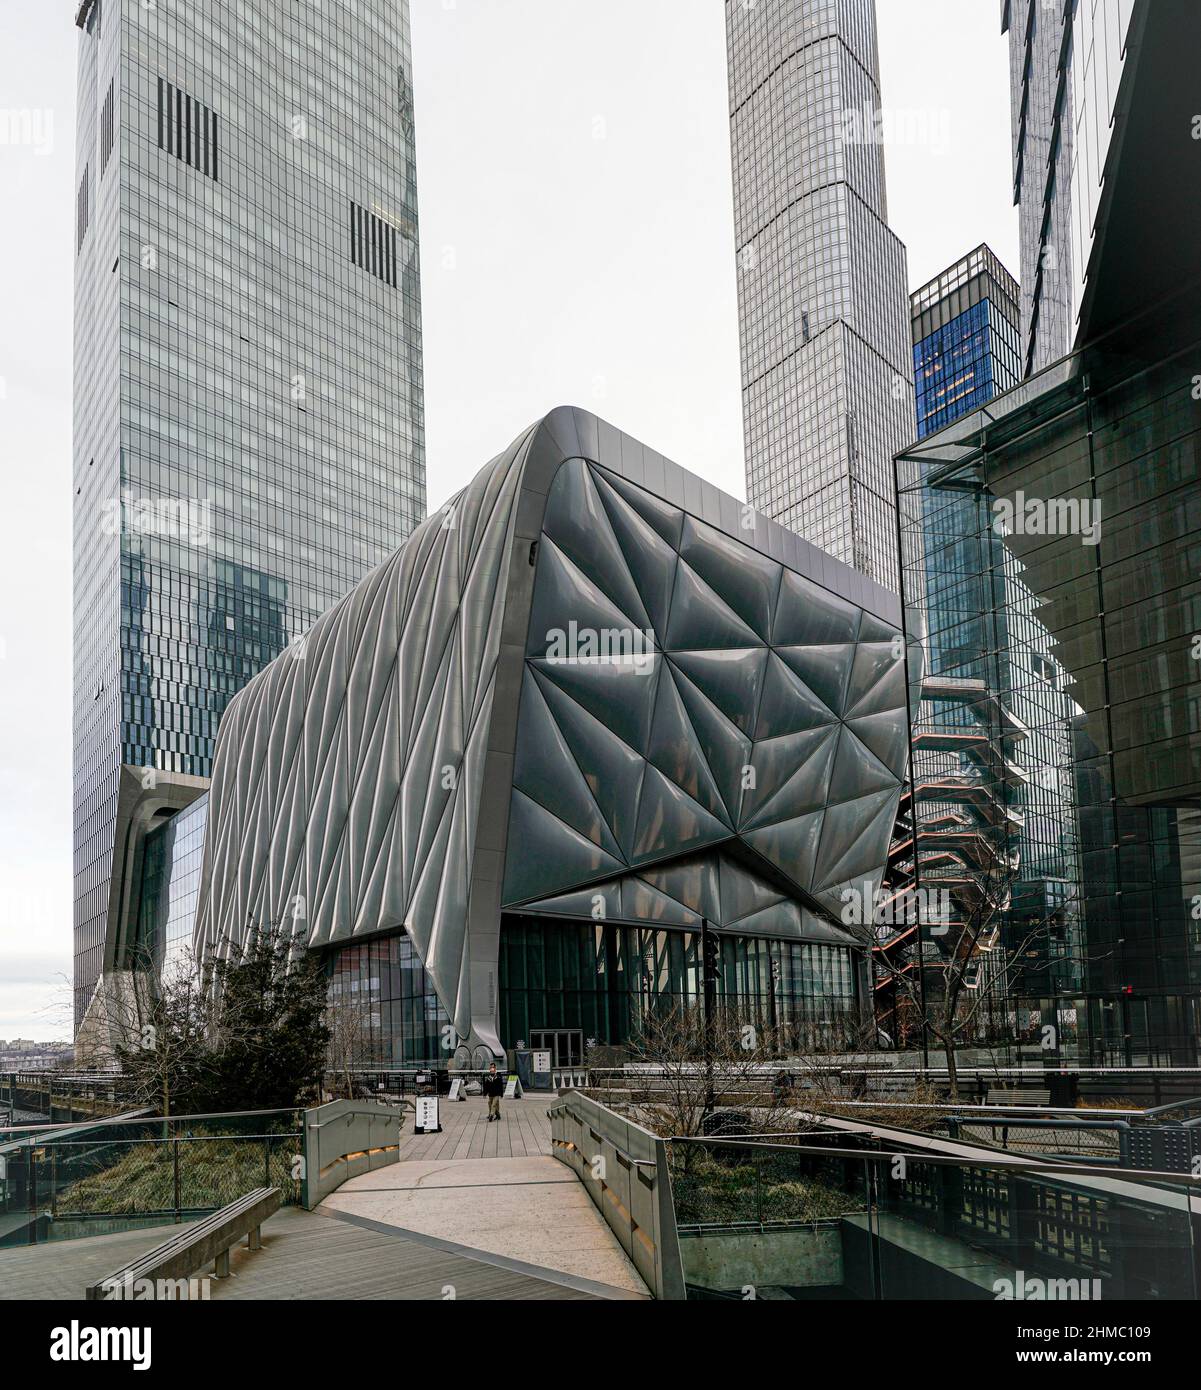 https://c8.alamy.com/comp/2HMC109/the-sheds-bloomberg-building-designed-by-diller-scofidio-renfro-is-an-iconic-space-with-moveable-outershell-for-large-scale-performances-install-2HMC109.jpg